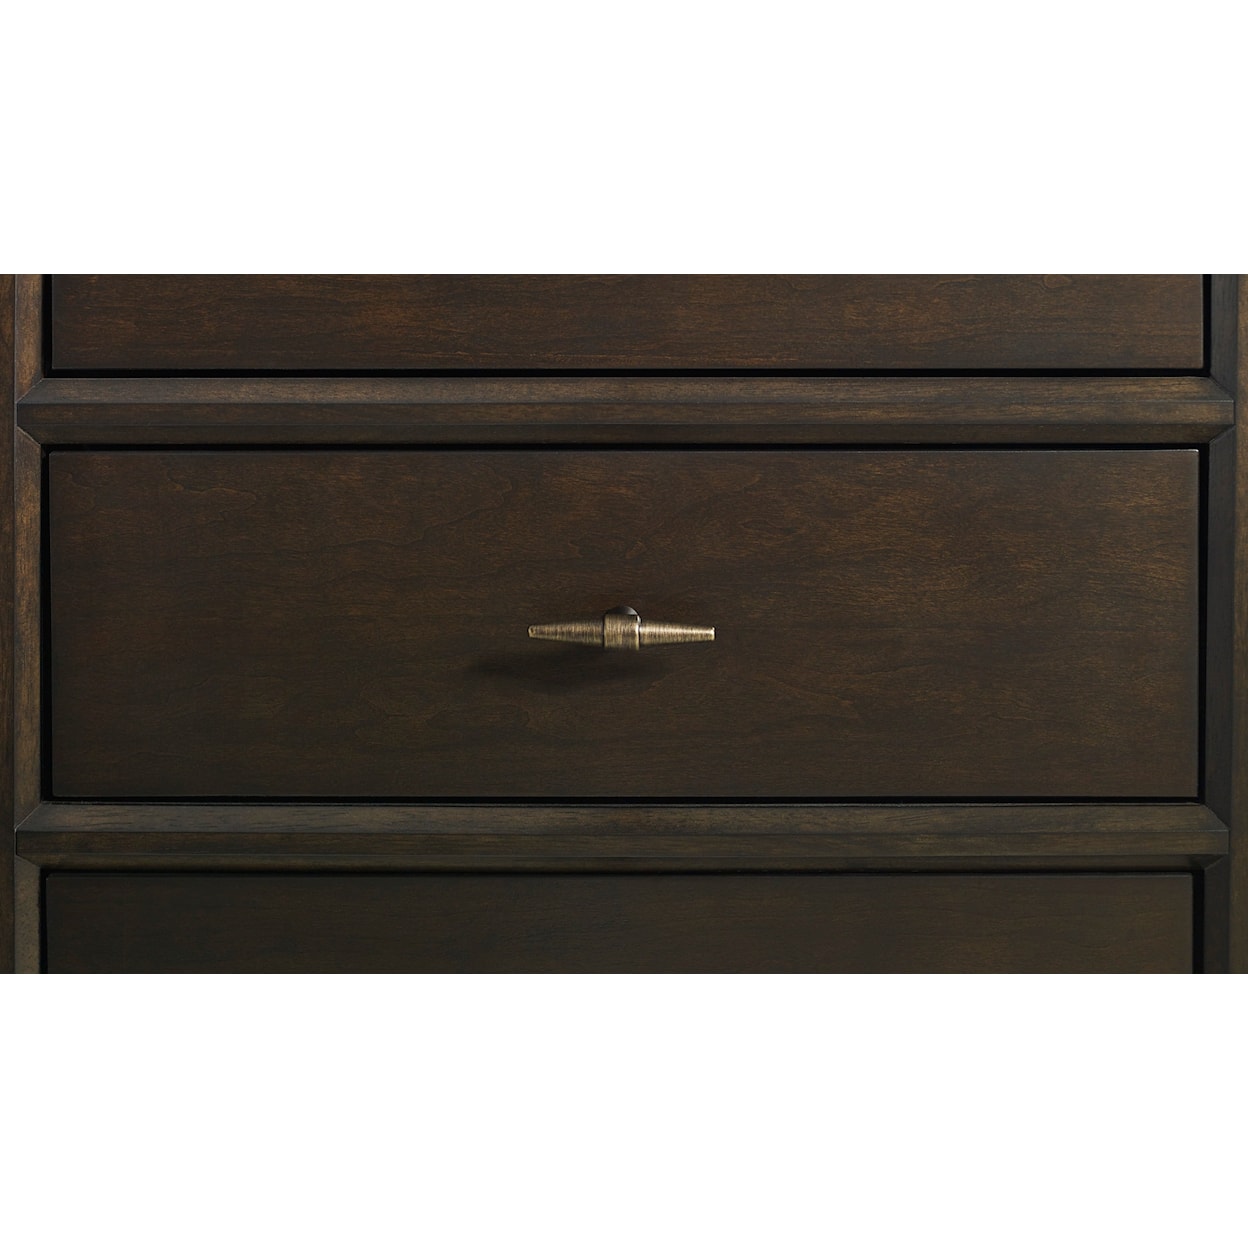 Aspenhome Sutton 5-Drawer Bedroom Chest